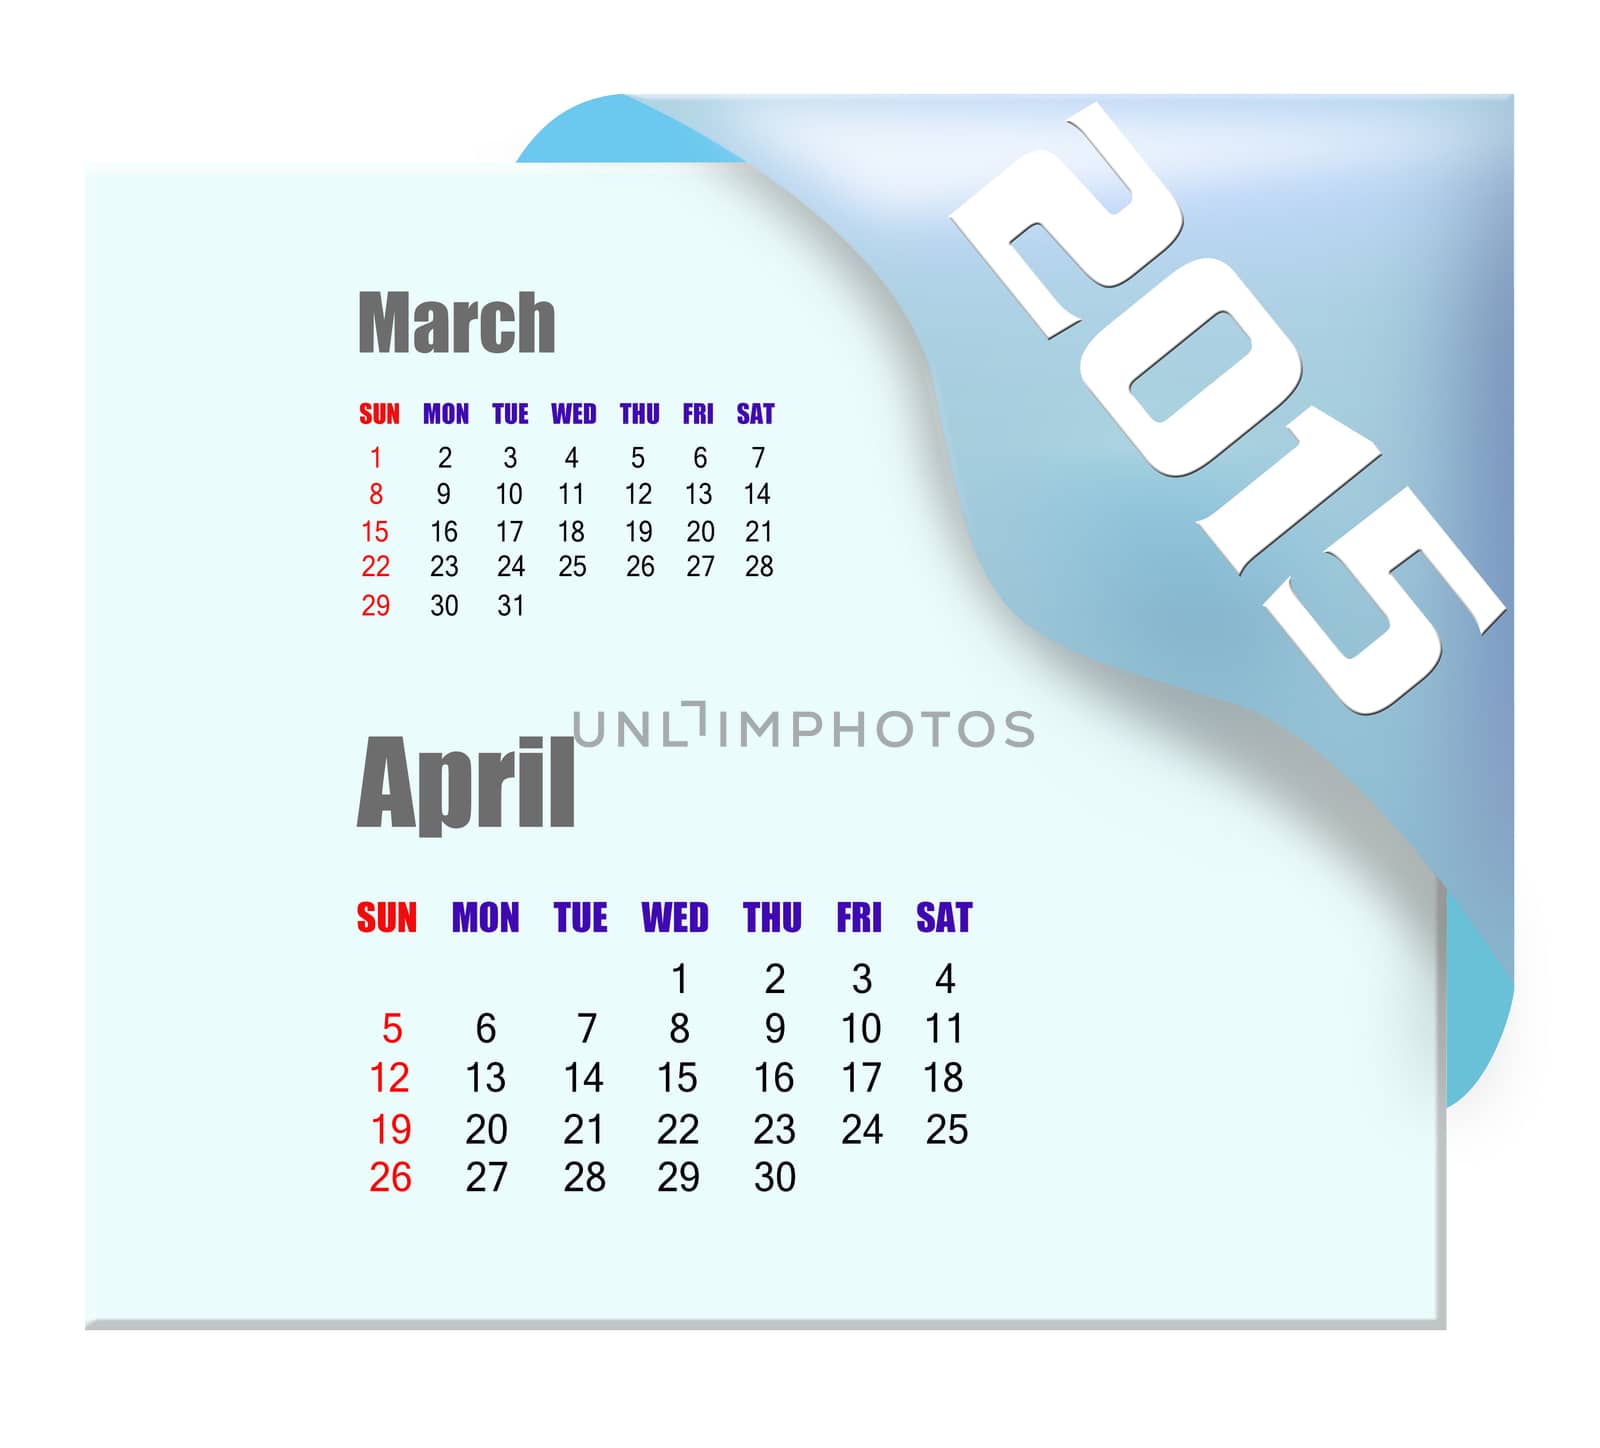 April 2015 calendar with past month series